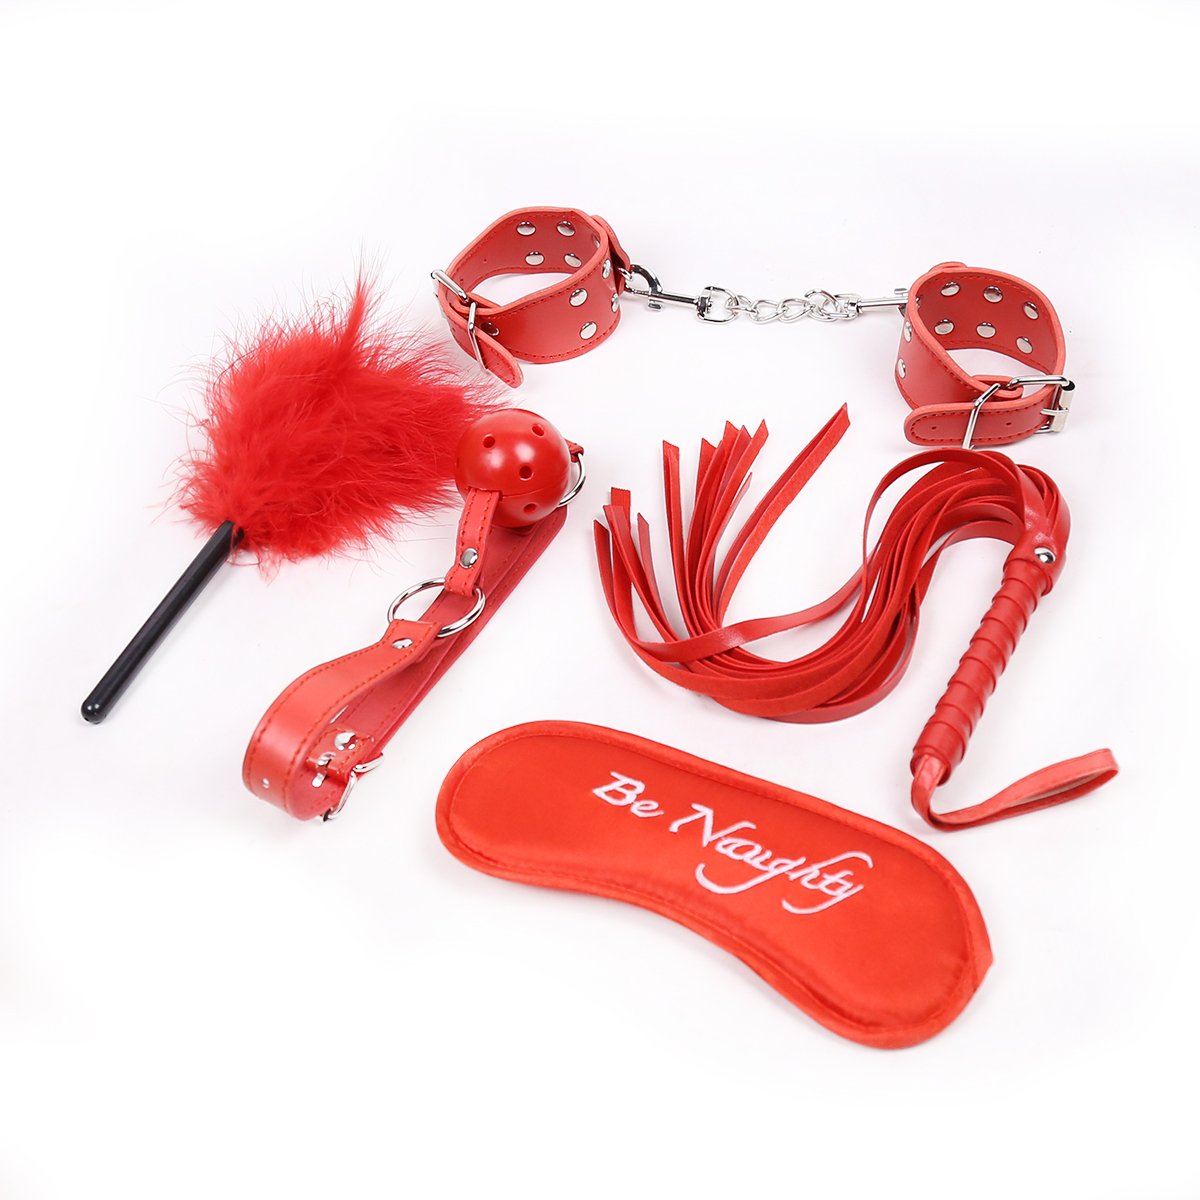 07.05.0006-Five-piece set of red leather hands